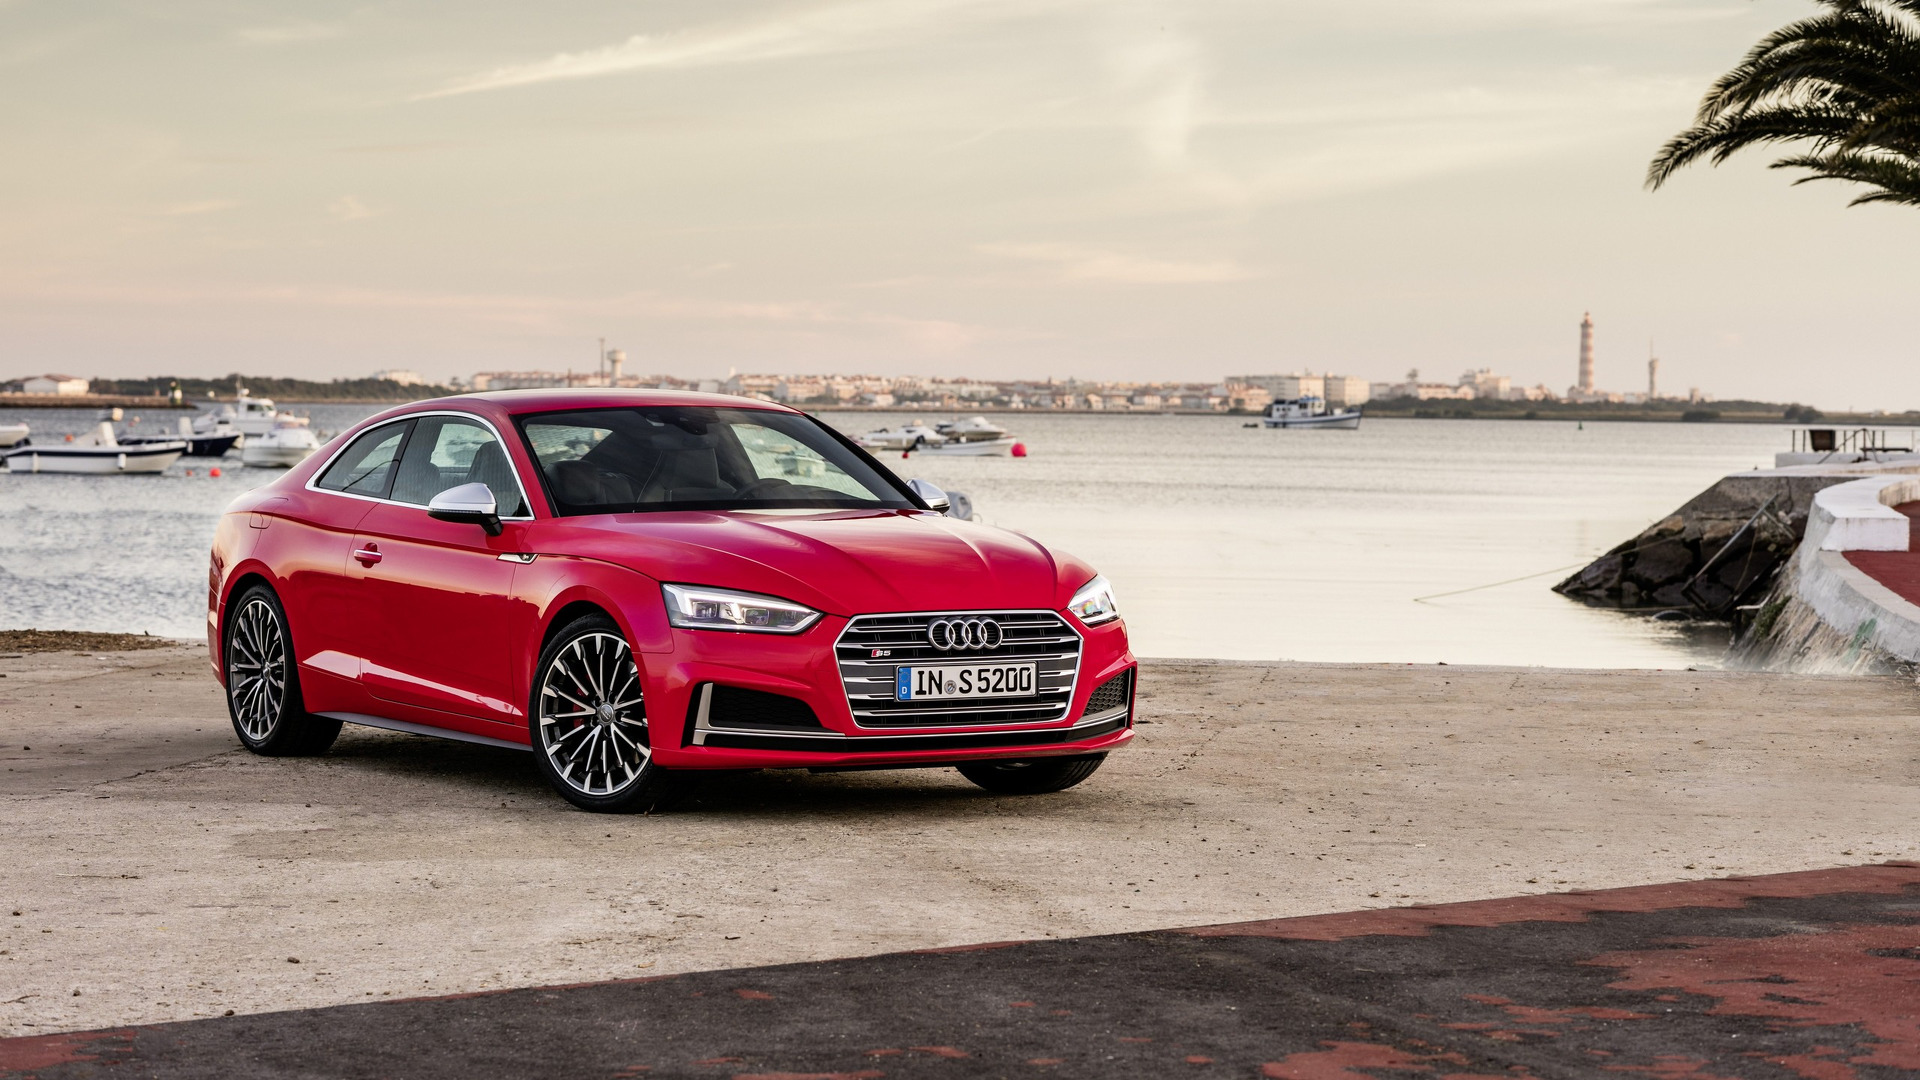 How Much Is It To Rent A Audi A5 Coupe In Dubai